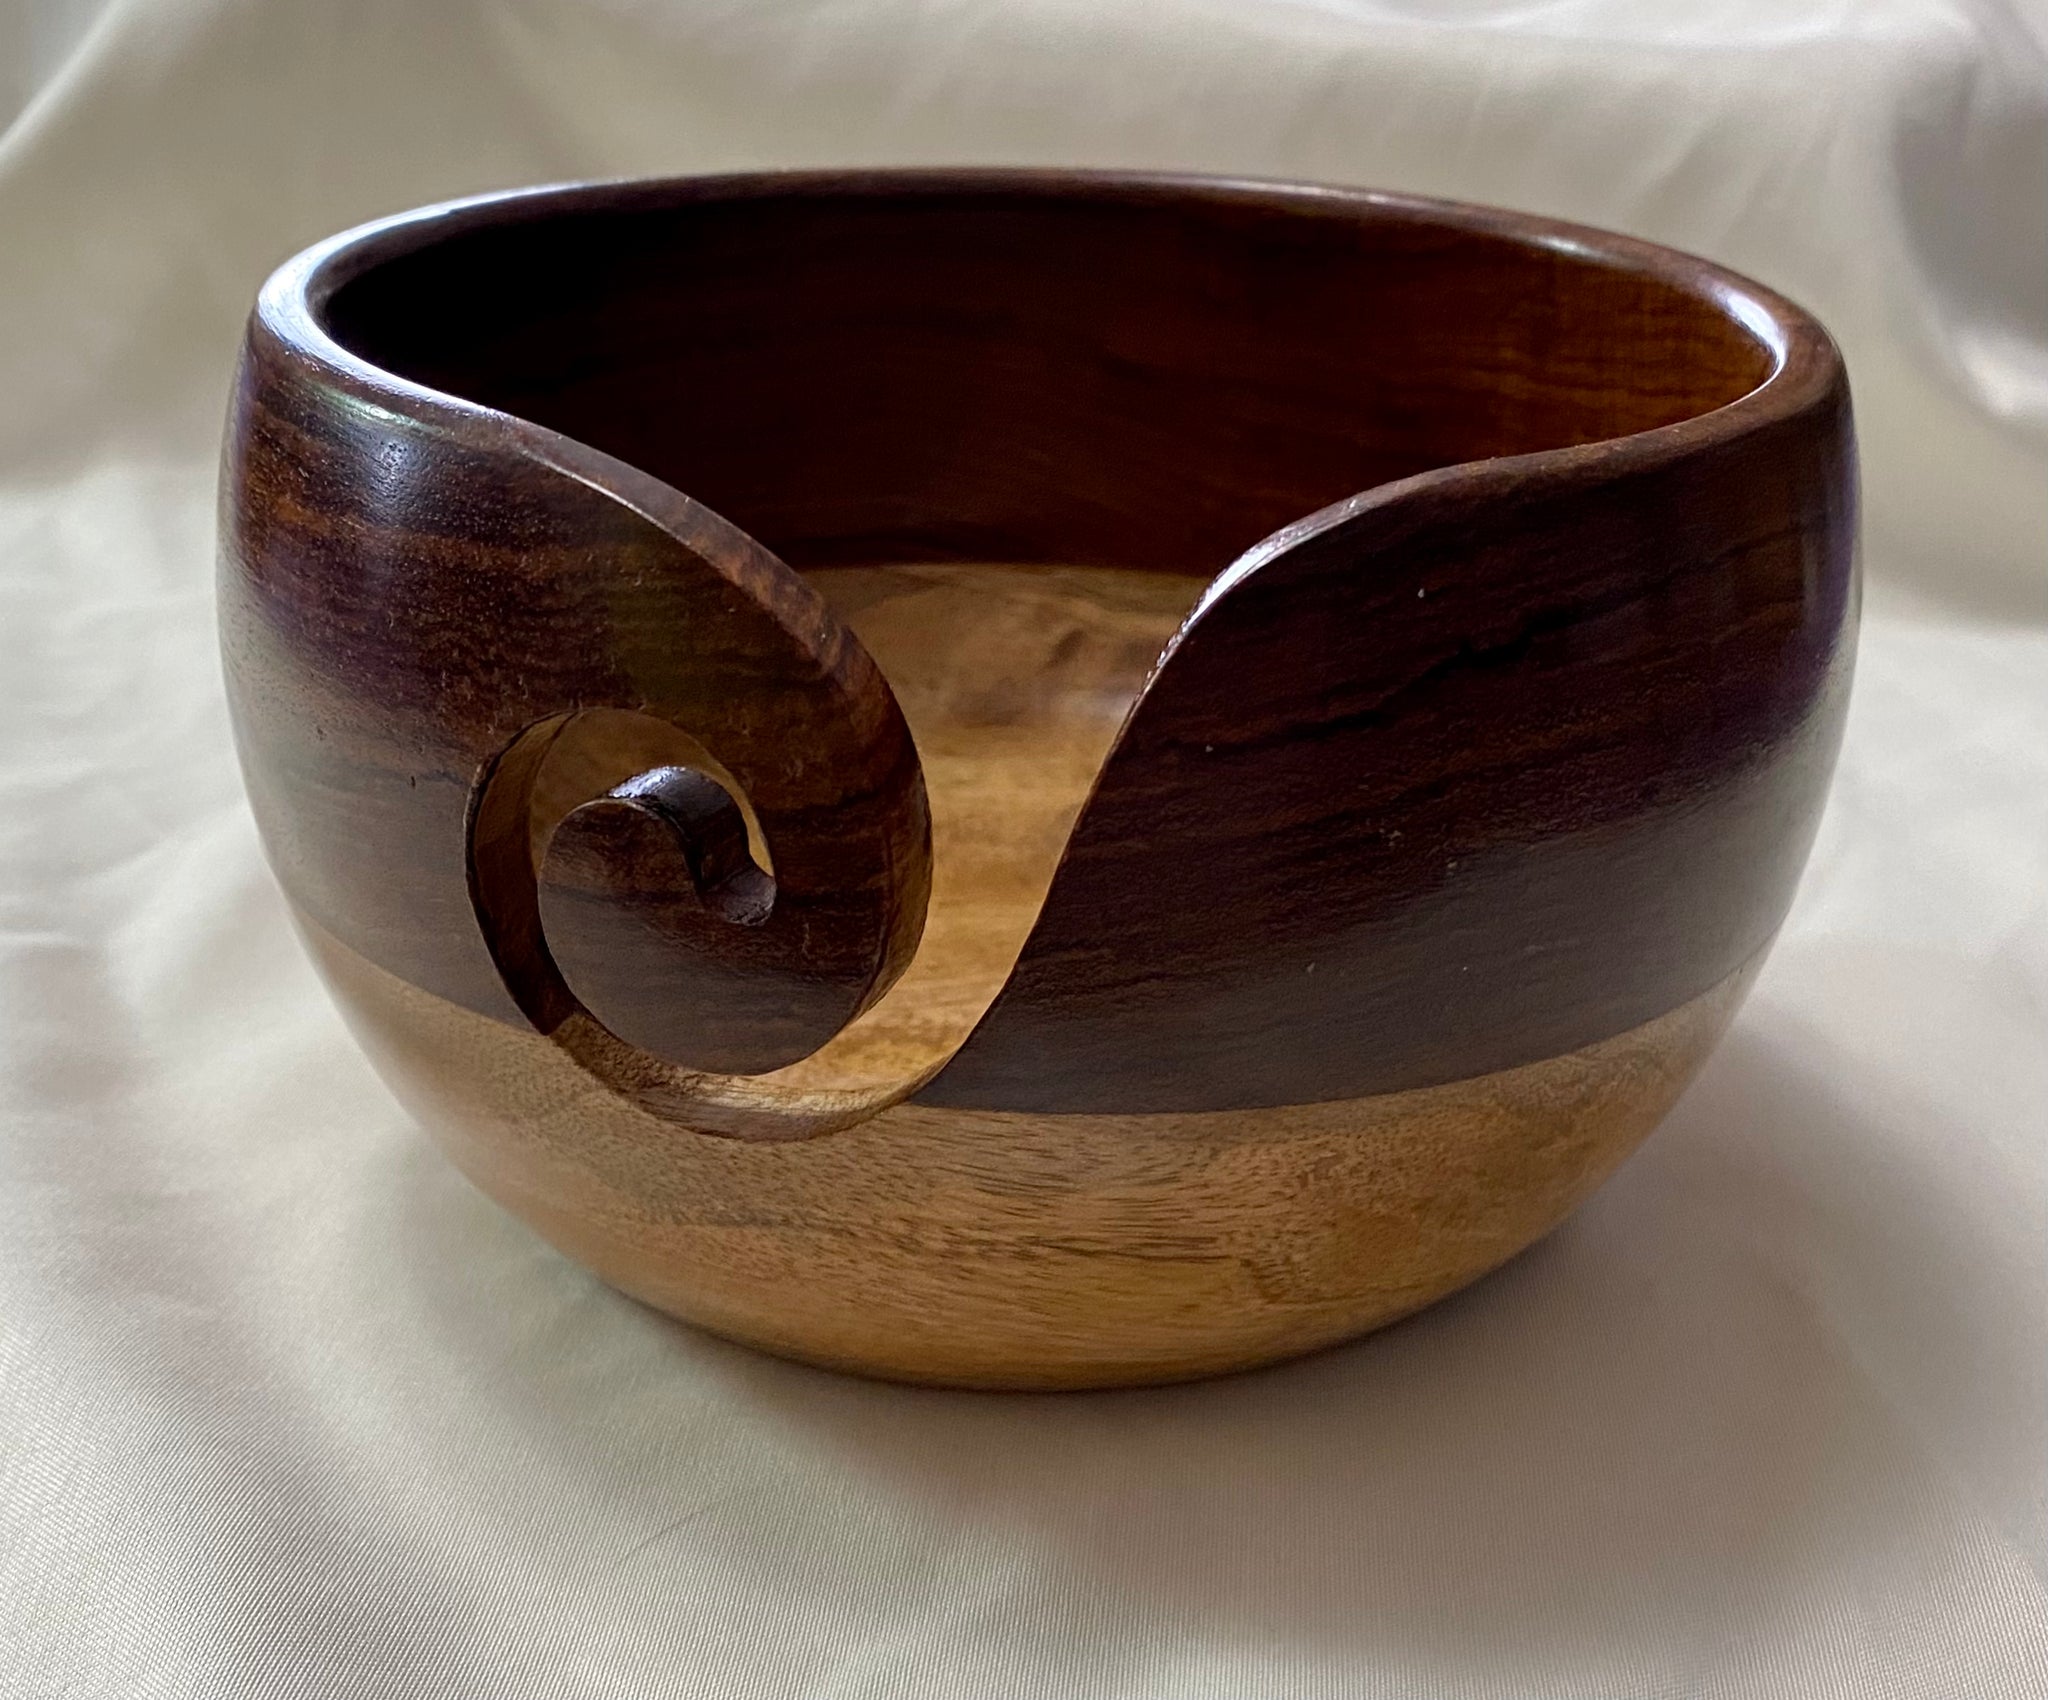 Wooden Yarn Bowls: 3 styles/colors to choose from – originalwoolydragon